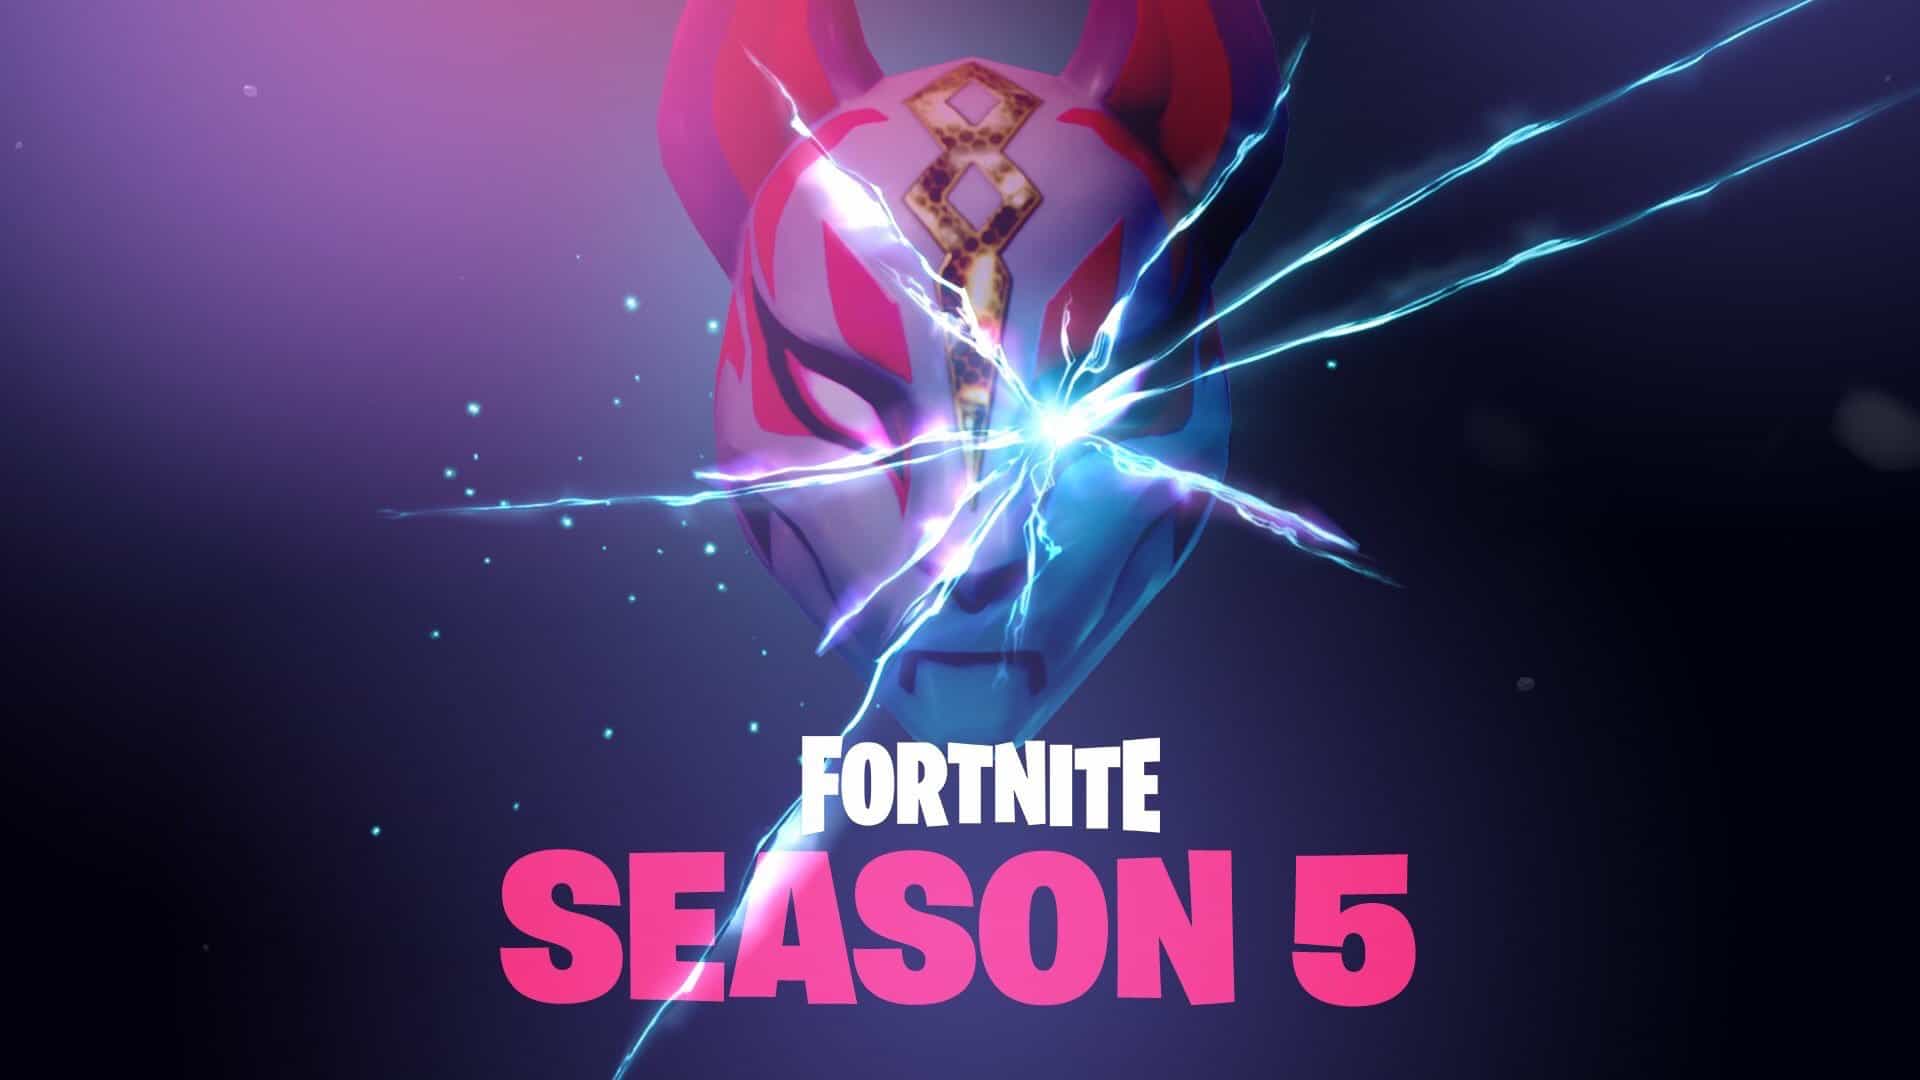 Fortnite season 5 adds new locations, second vehicle, lots more